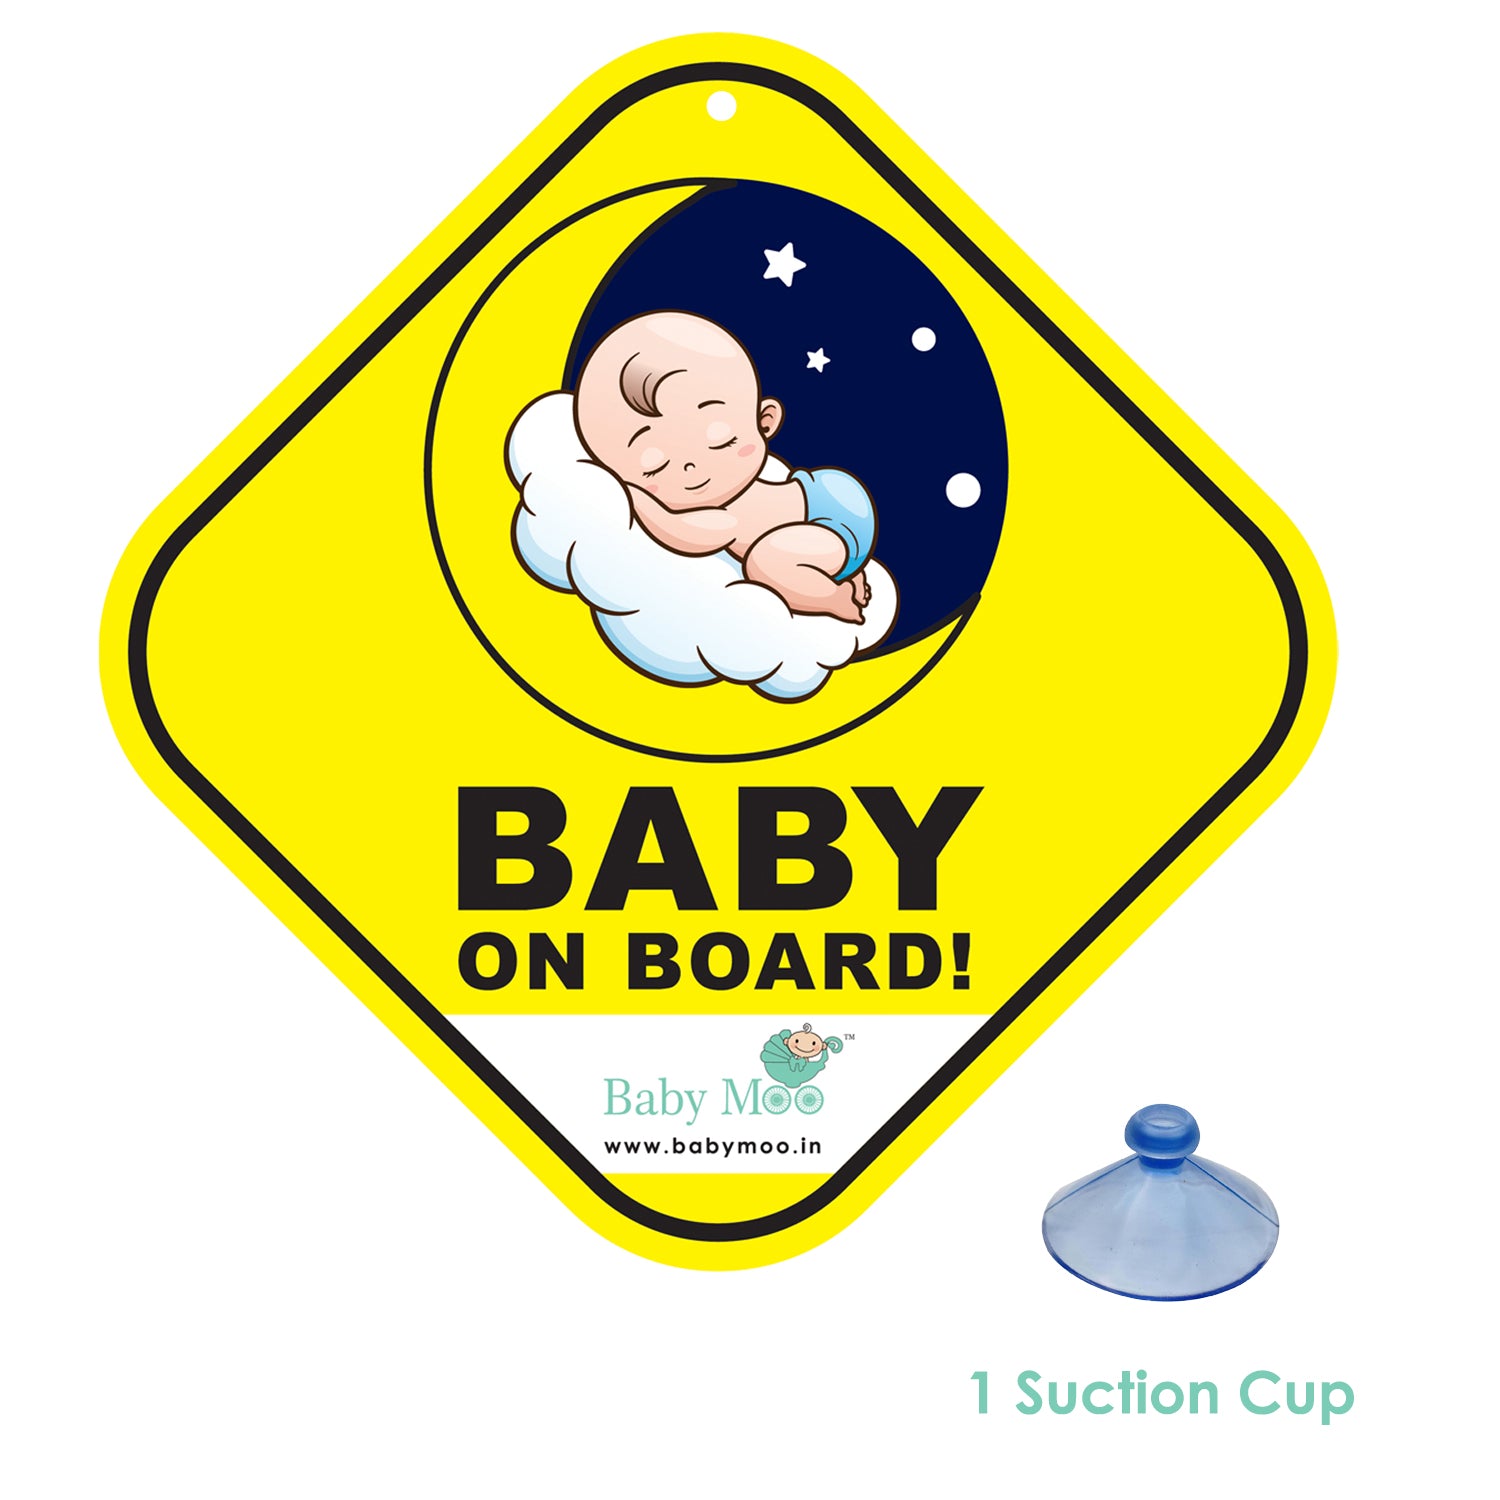 Baby Moo Snoozing Angel Car Sign With Vacuum Suction Cup Clip - Yellow